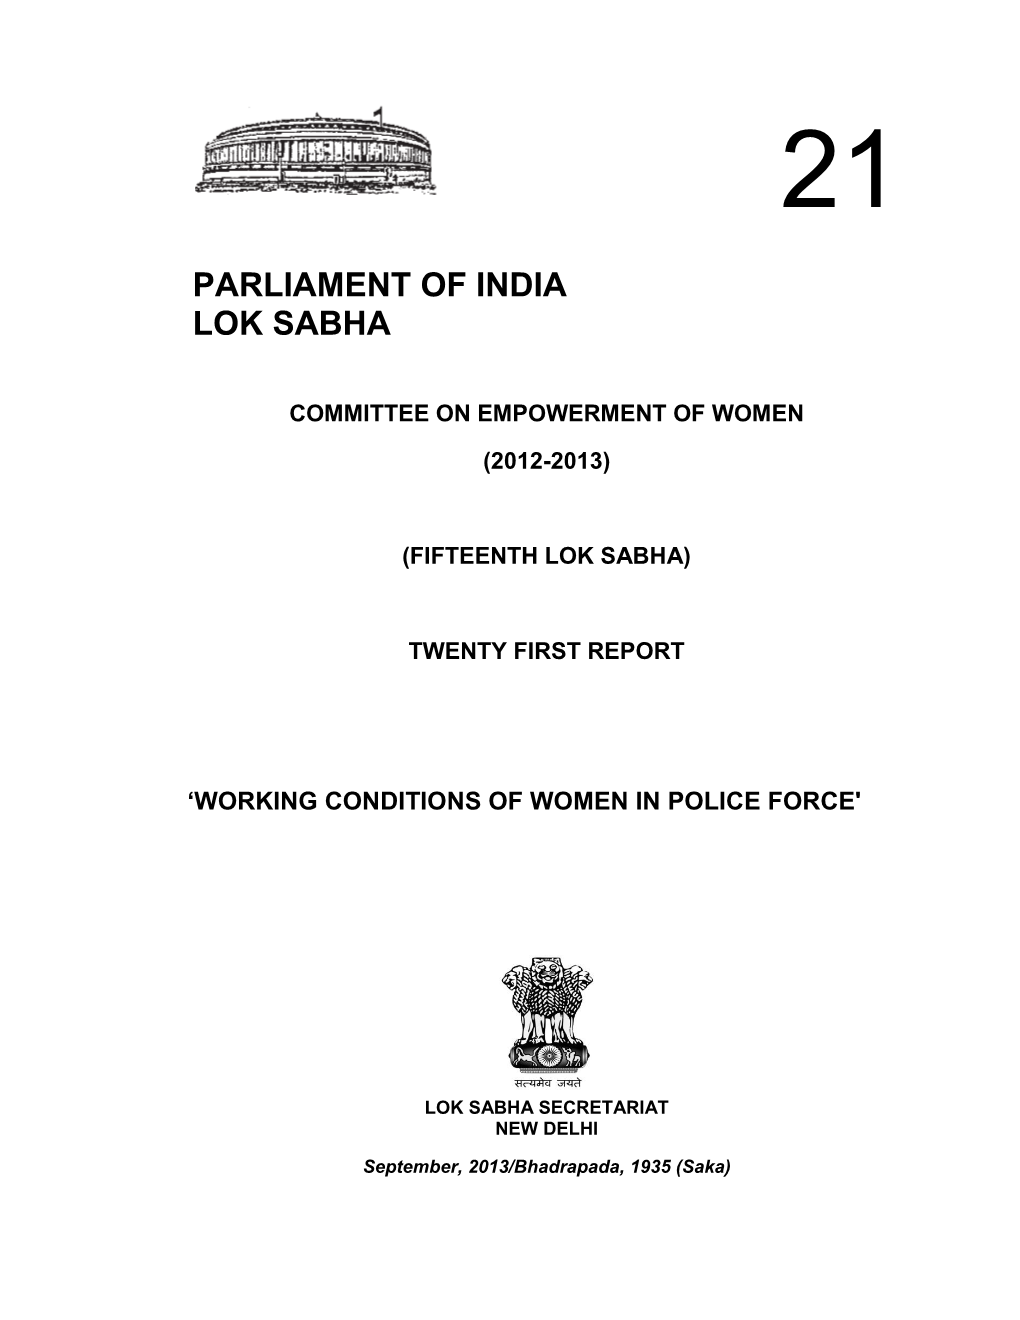 Working Conditions of Women in Police Force'